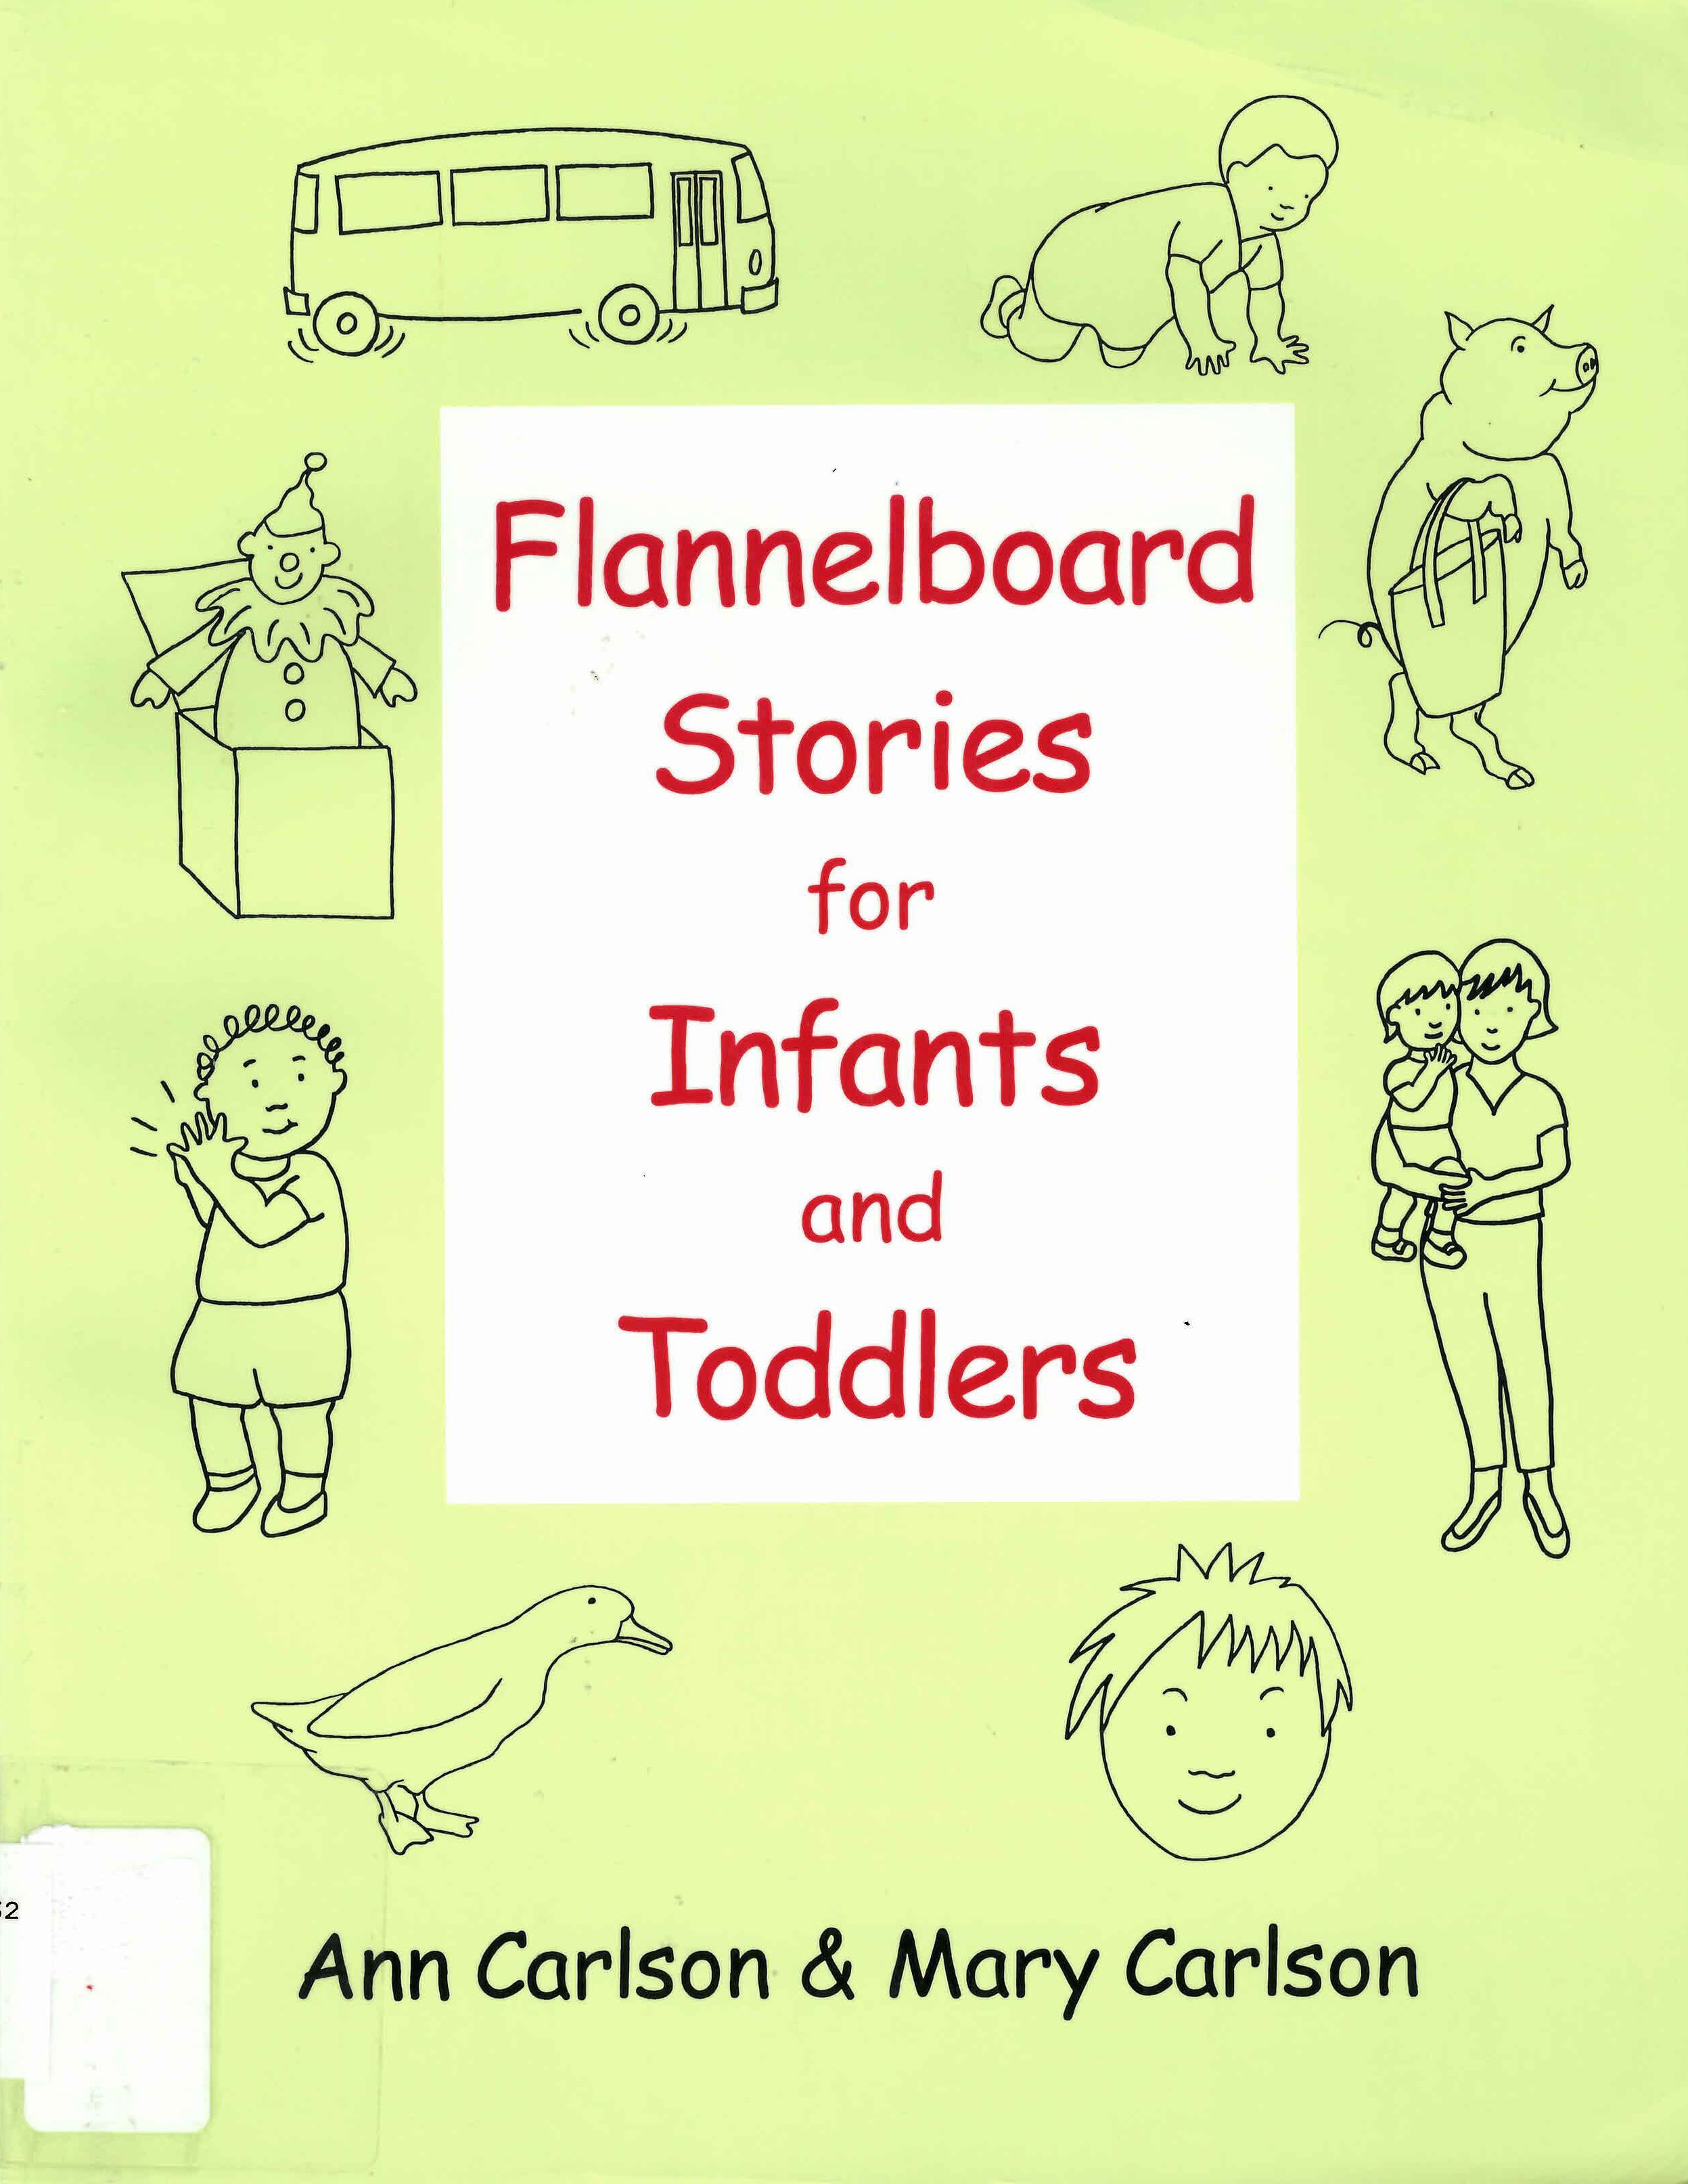 Flannelboard stories for infants and toddlers